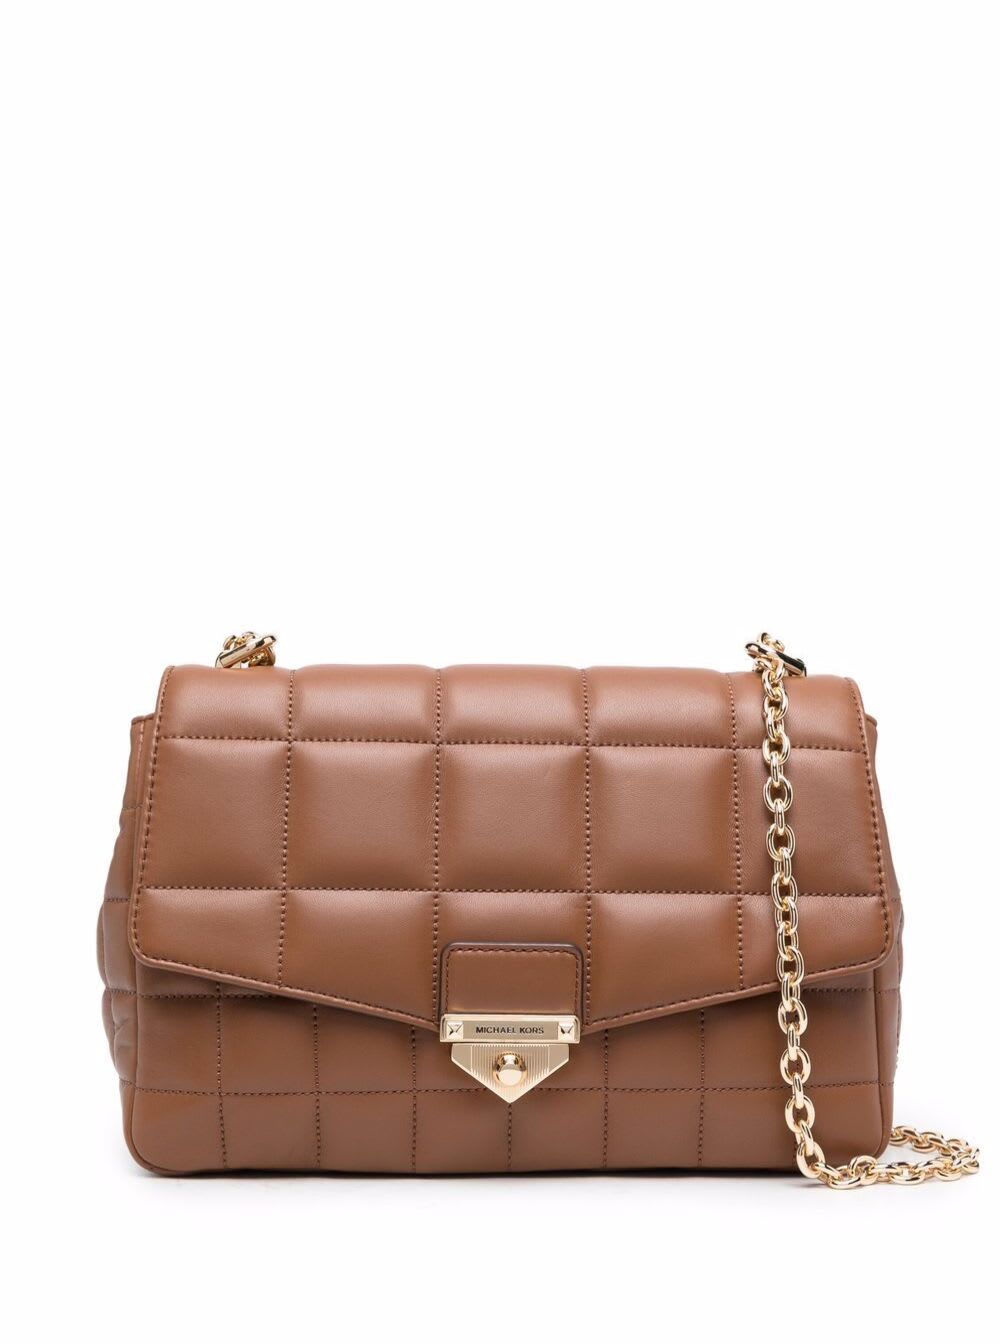 MICHAEL Michael Kors Soho Brown Quilted Leather Crossbody Bag